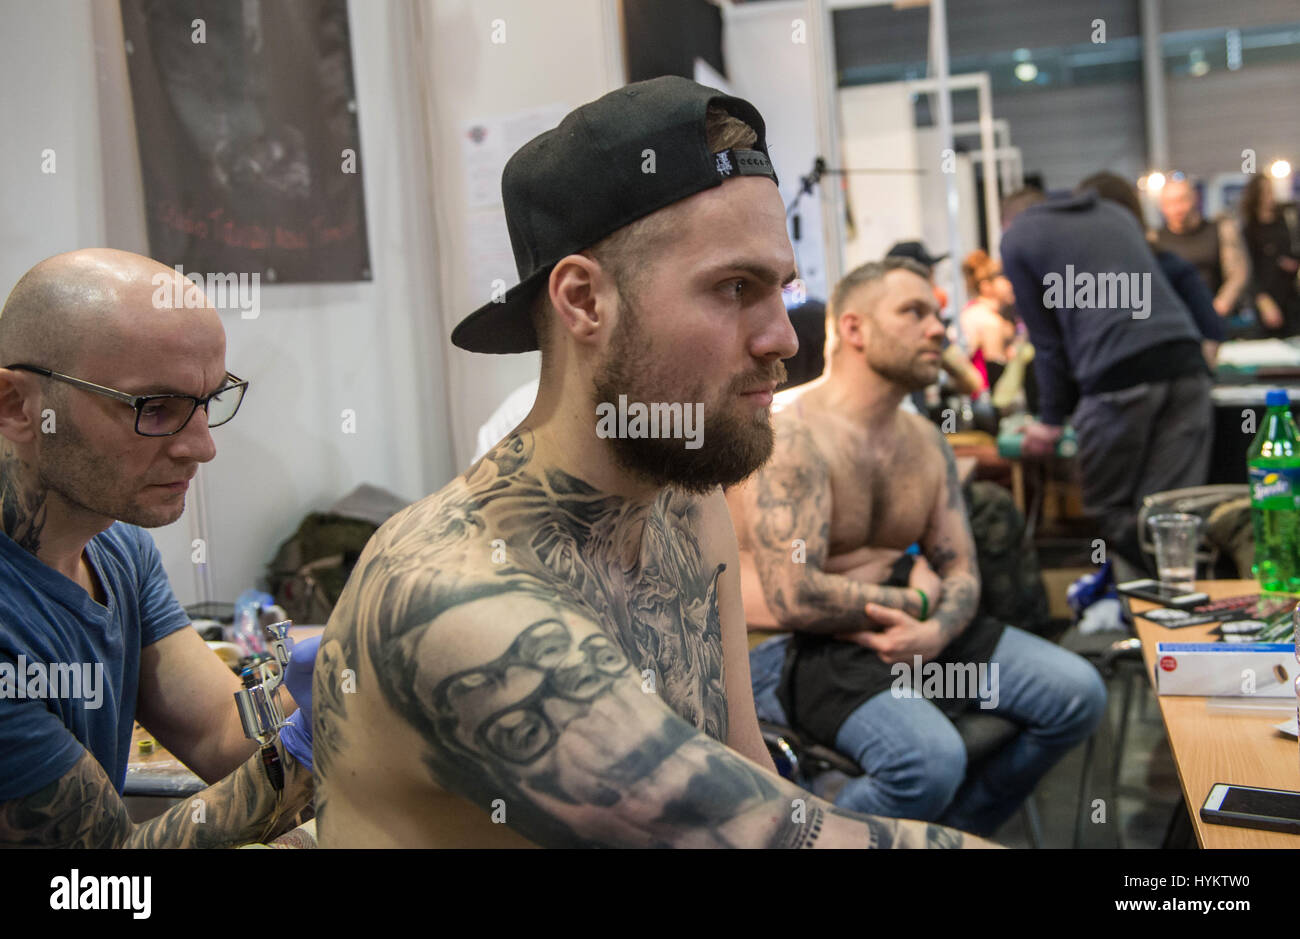 Poznan, Poland: INKED IN men with full body tattoos to ladies having their  most intimate parts decorated this tattoo convention is a body art lover's  paradise. Pictures show how guests at the